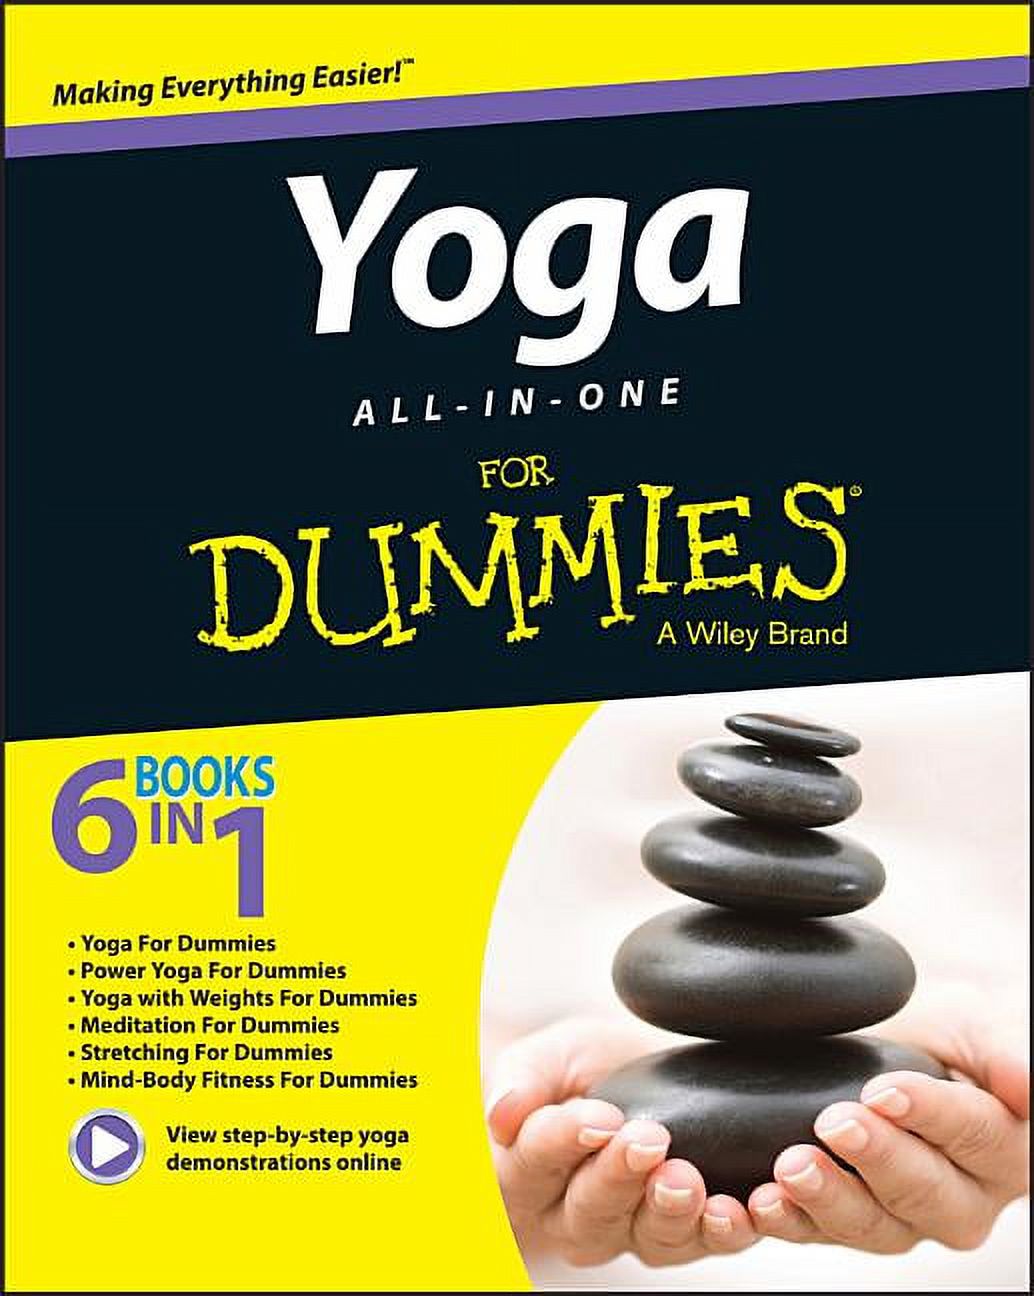 Yoga All-In-One for Dummies (Paperback) - image 1 of 1